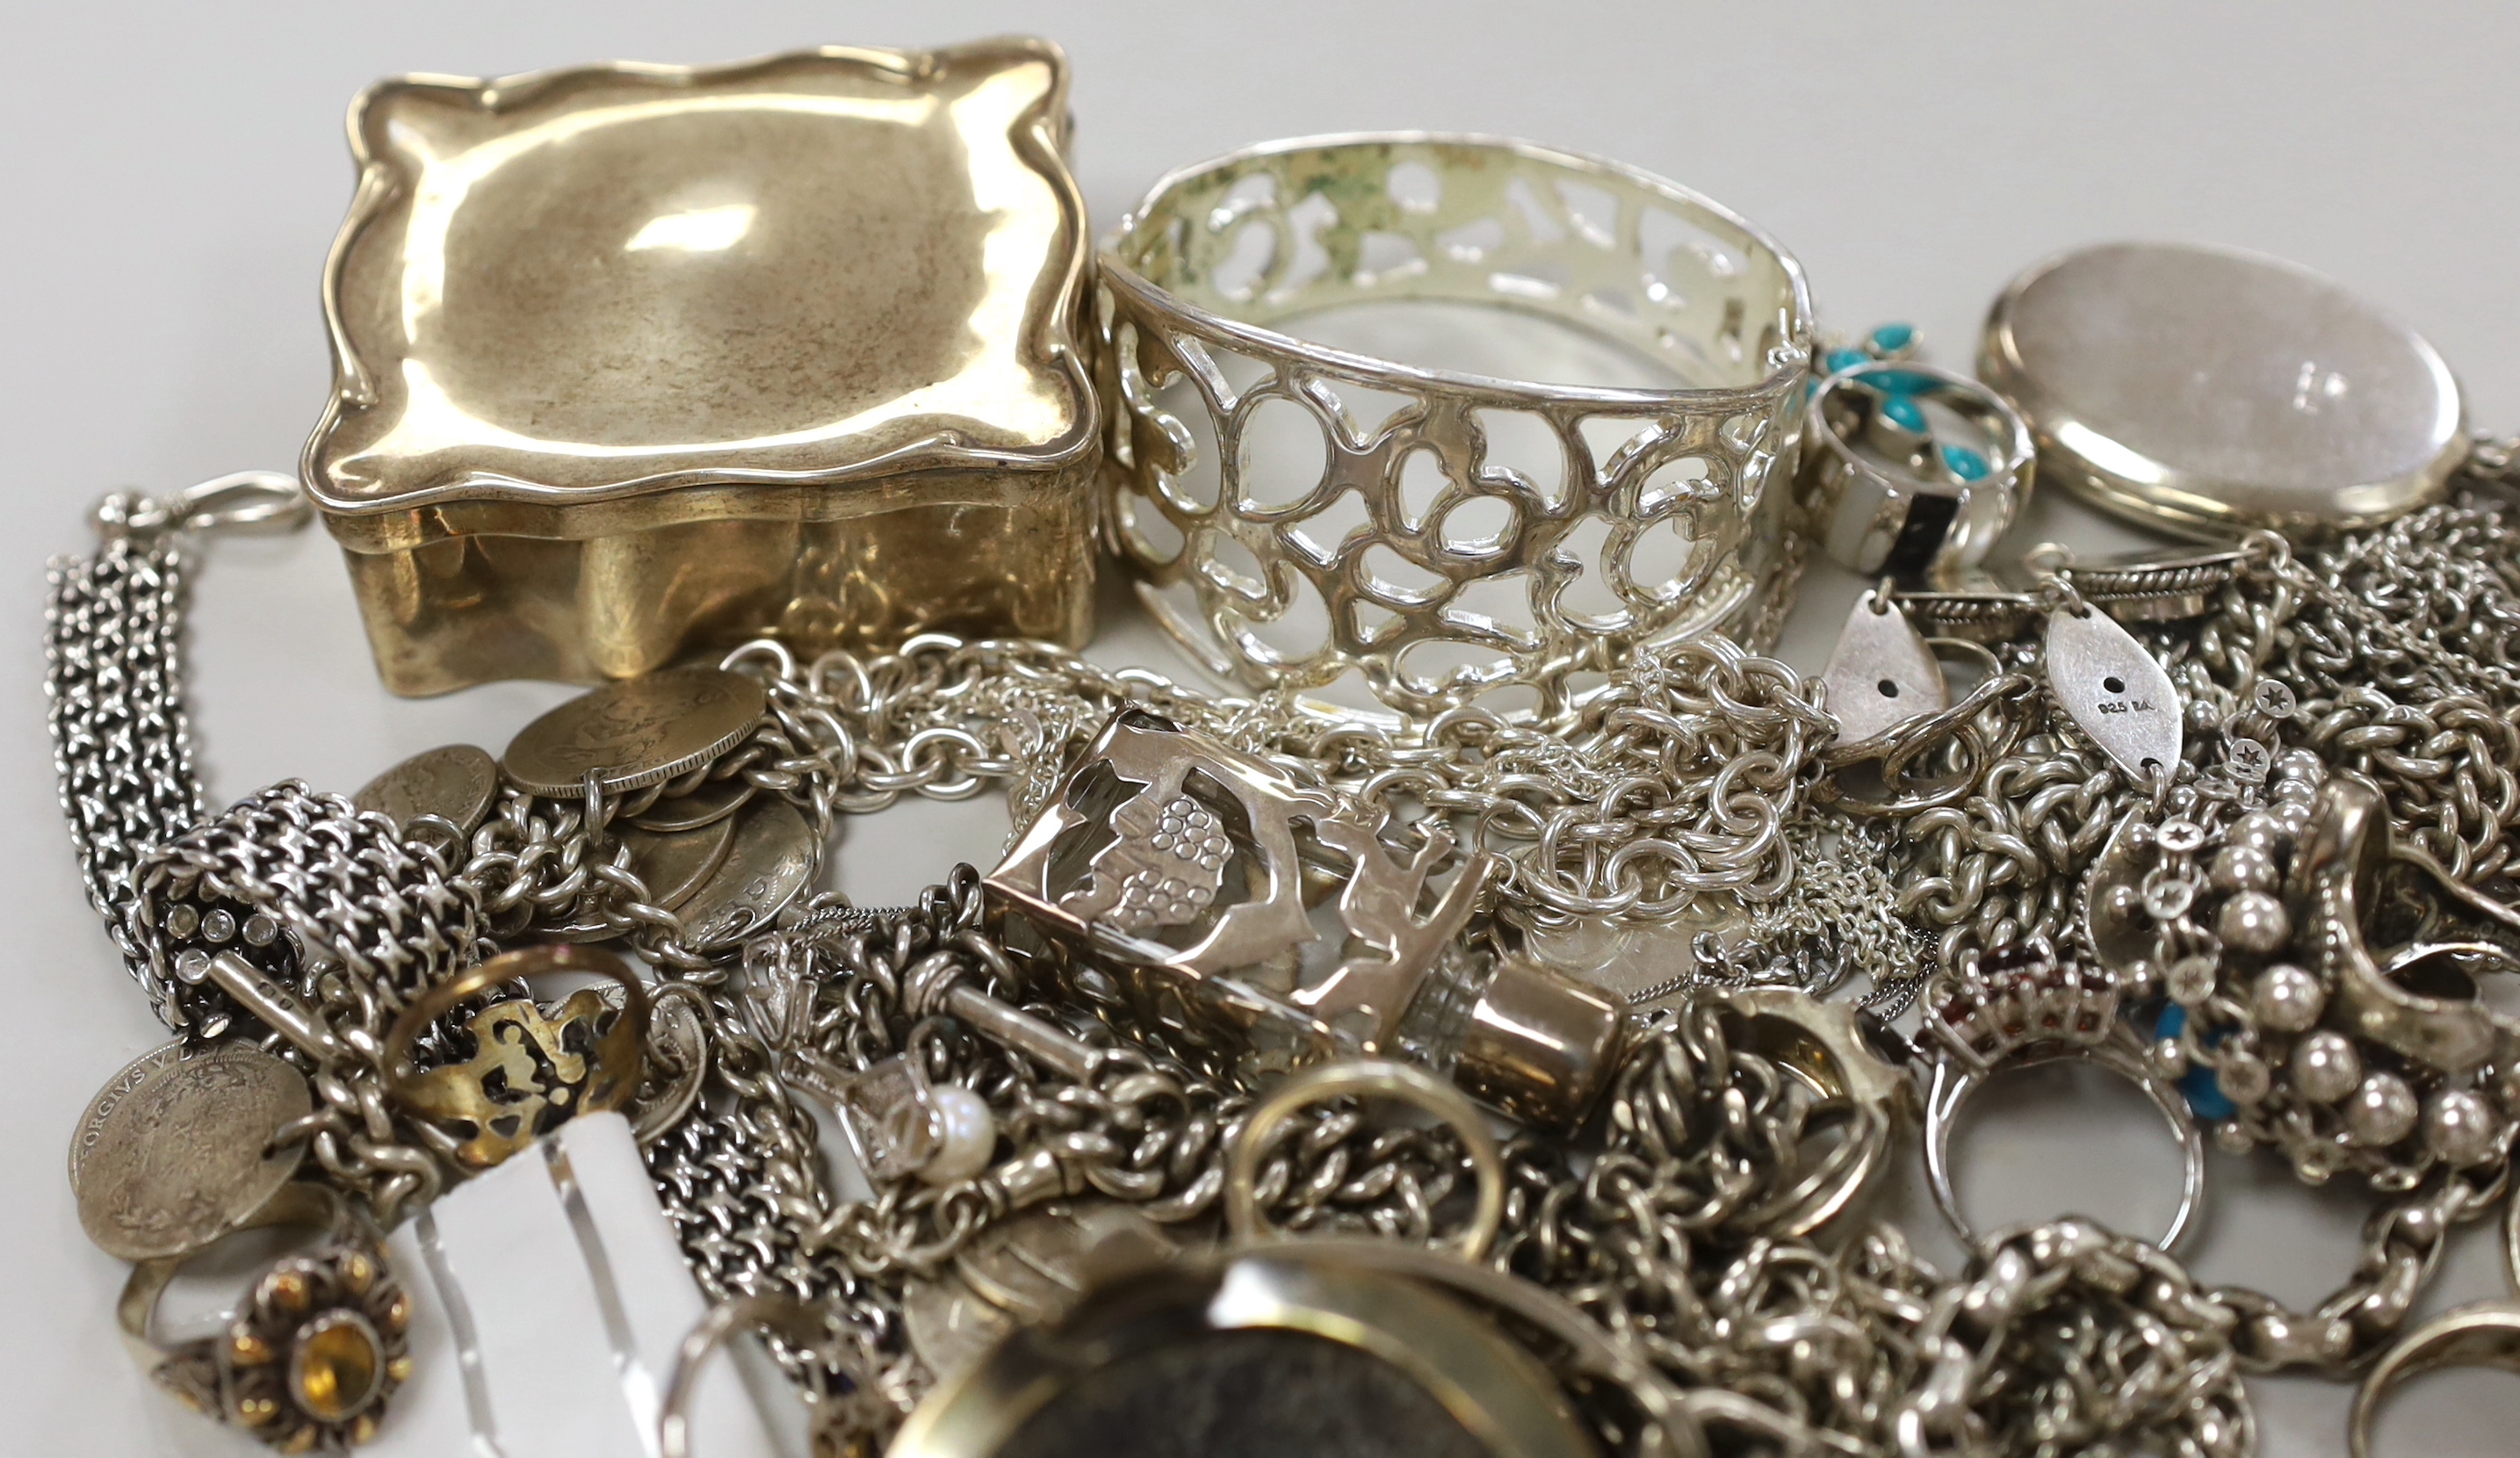 A mixed group of assorted silver and other jewellery, including albert, chains, bracelets, silver mounted ring box, etc.